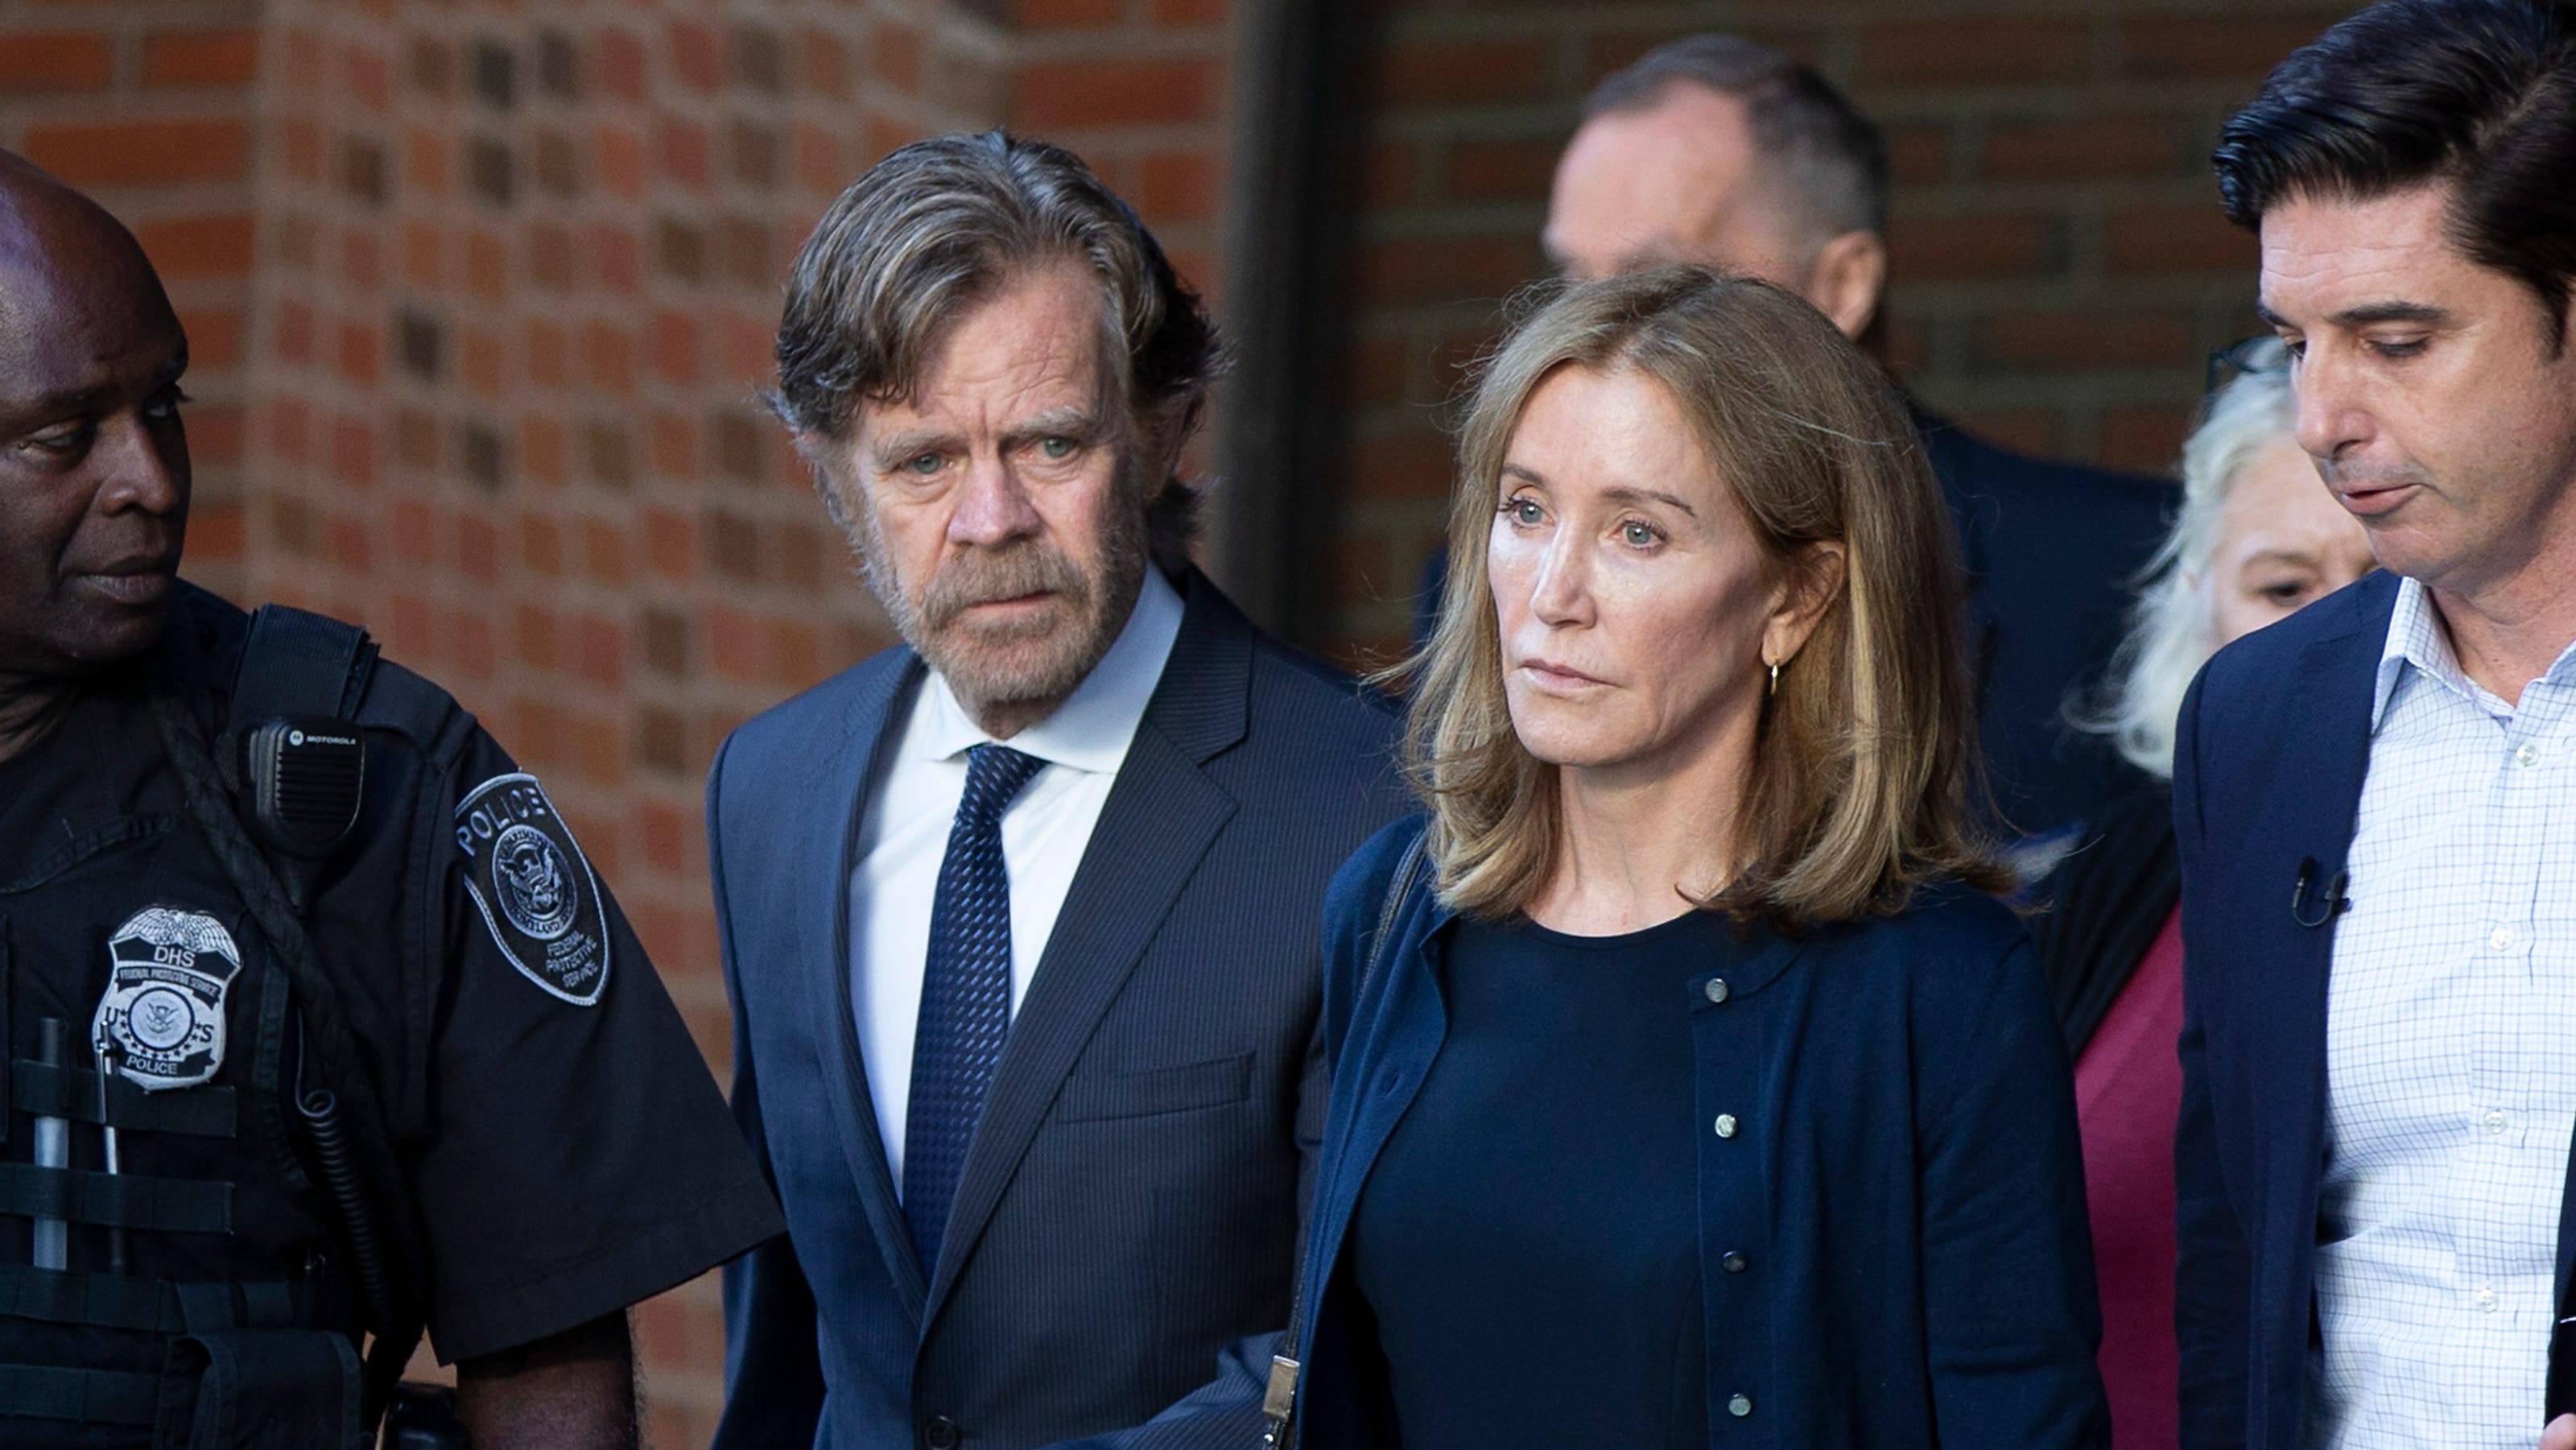 Felicity Huffman Sentenced To 14 Days In Prison In Admissions Scandal